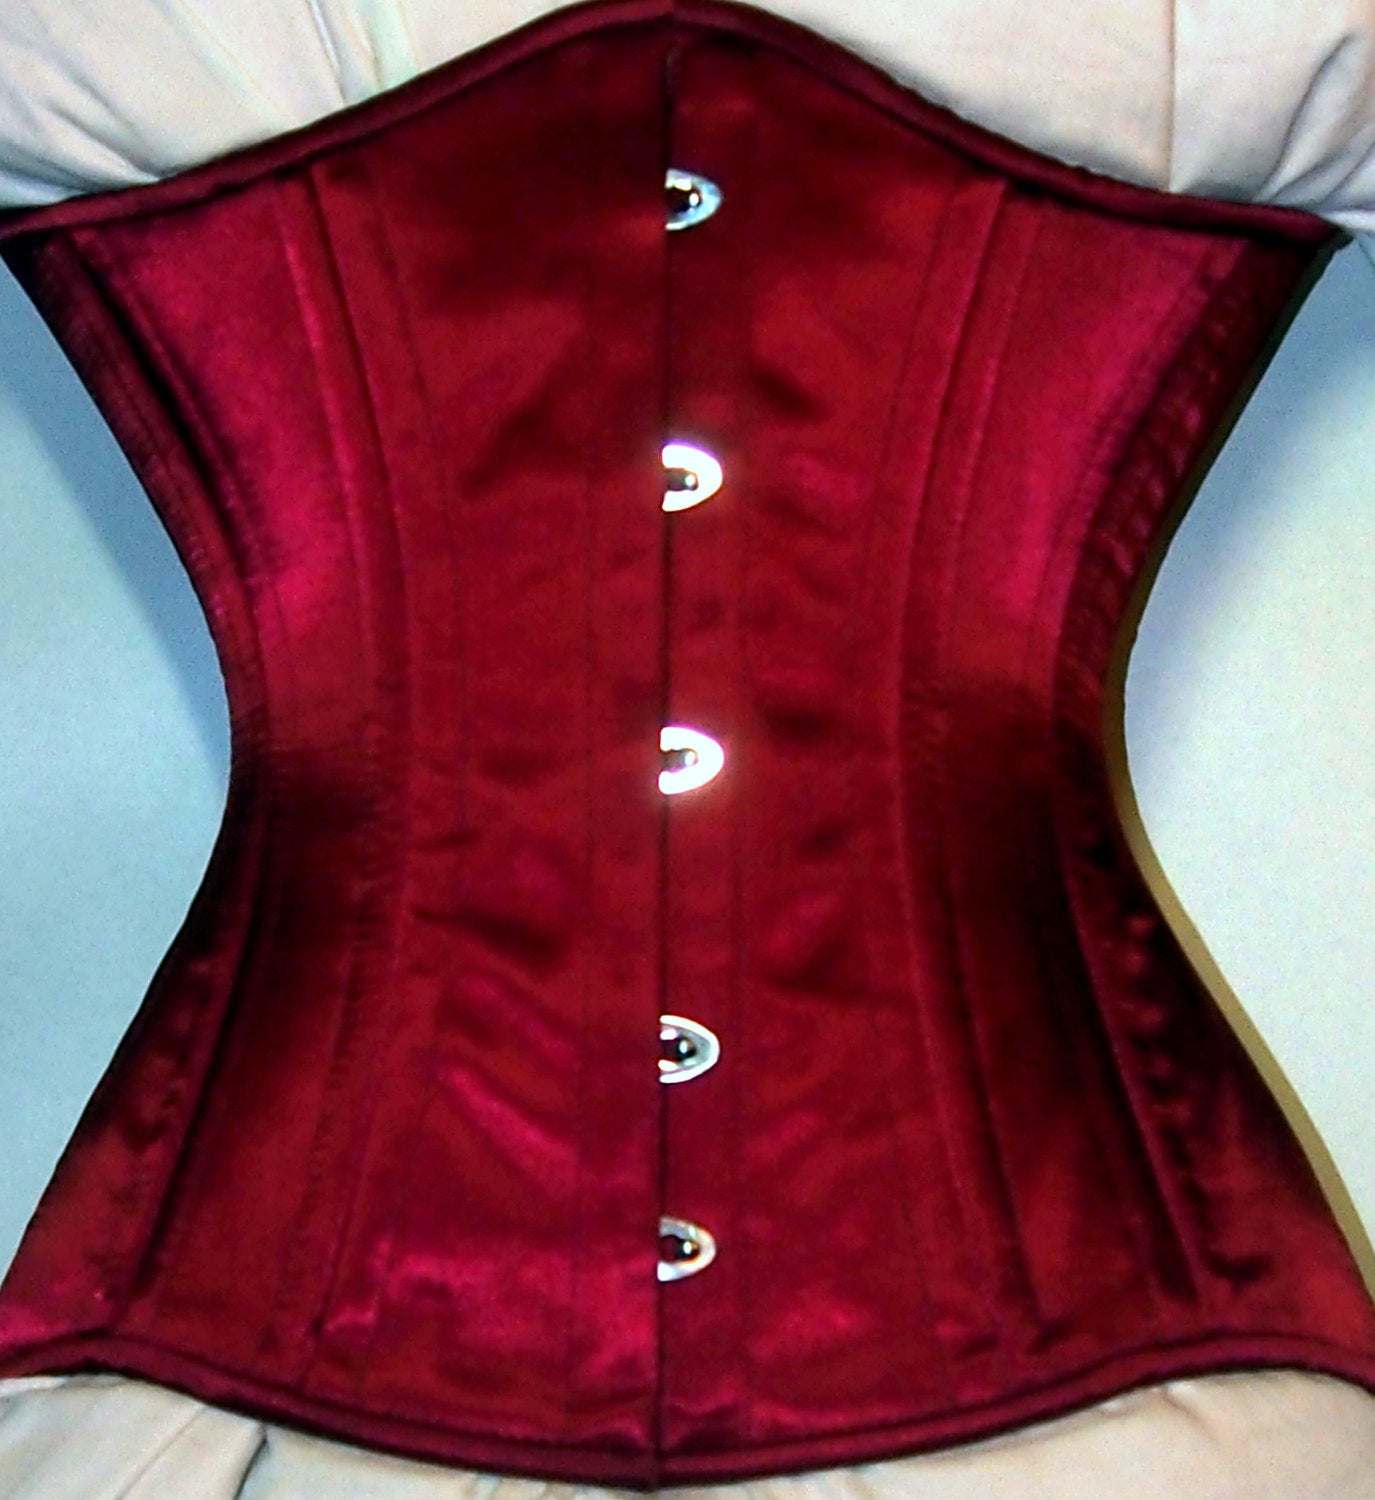 Real double row steel boned underbust corset from satin. Real waist training corset for tight lacing. Black, white, red, pink and other colors Corsettery